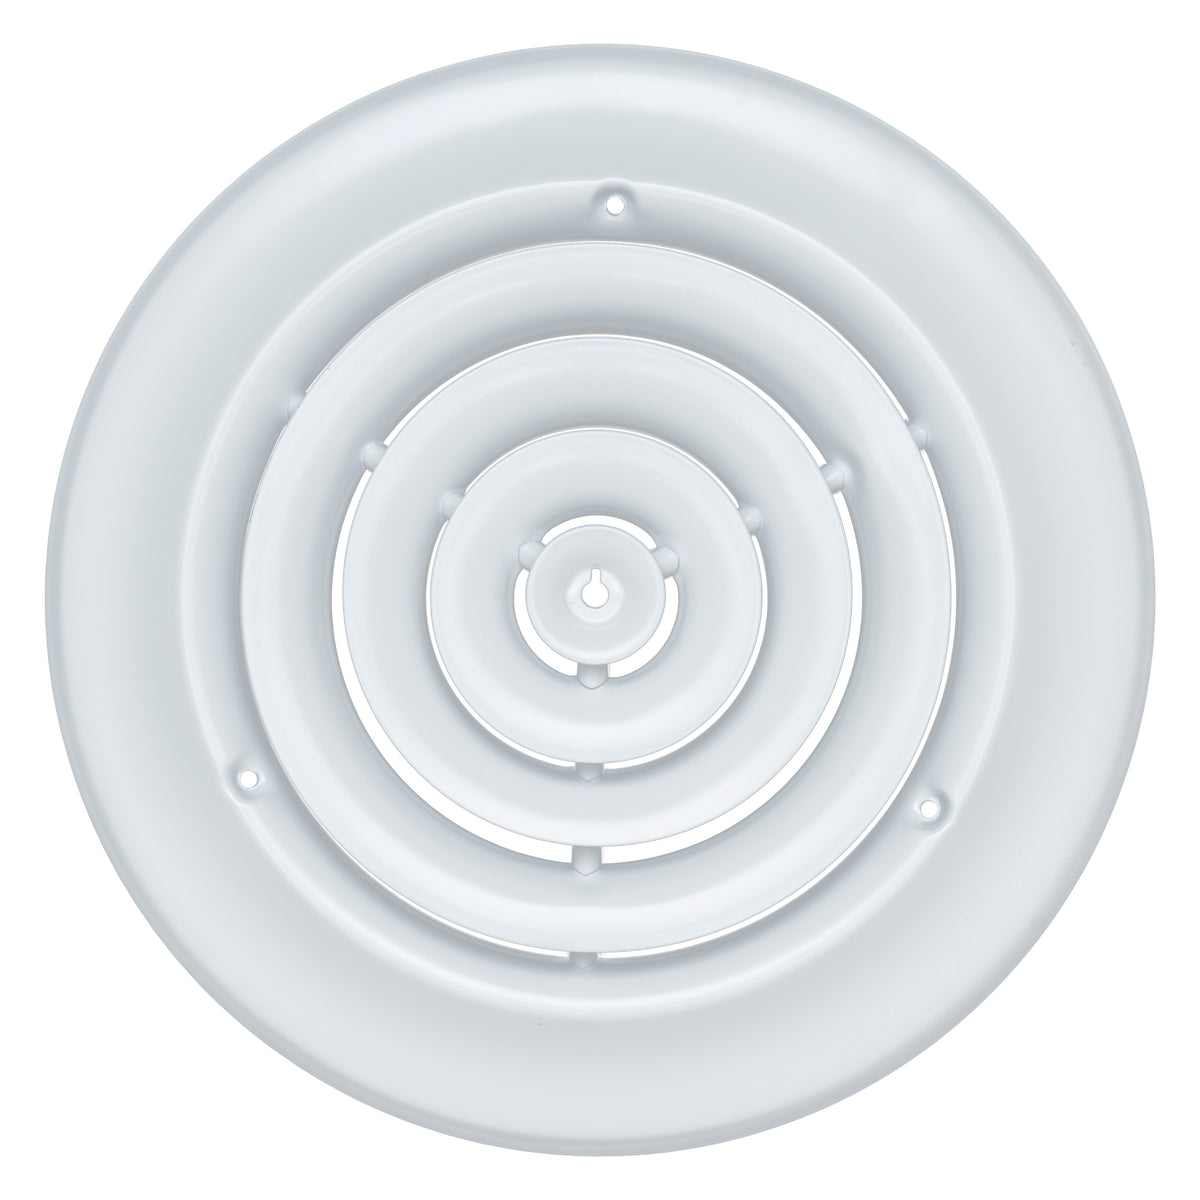 Handua 8" [Neck Size] Steel Round Air Supply Diffuser for Ceiling - White - Outer Dimension: 11-15/16"